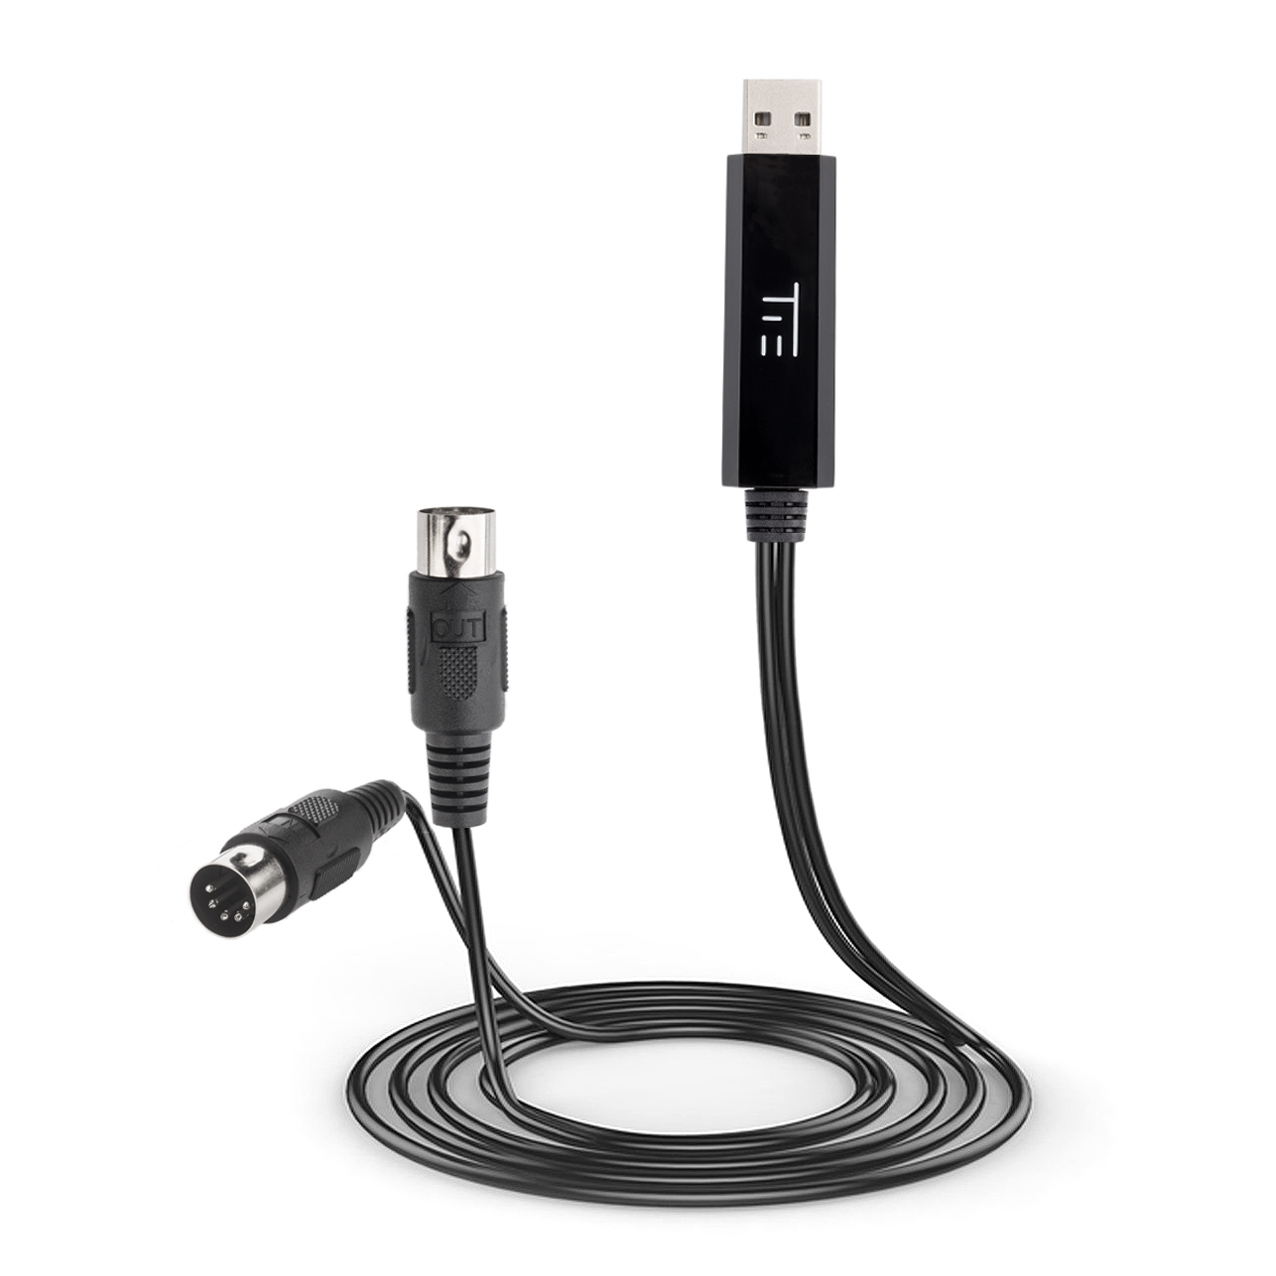 midi to usb cable